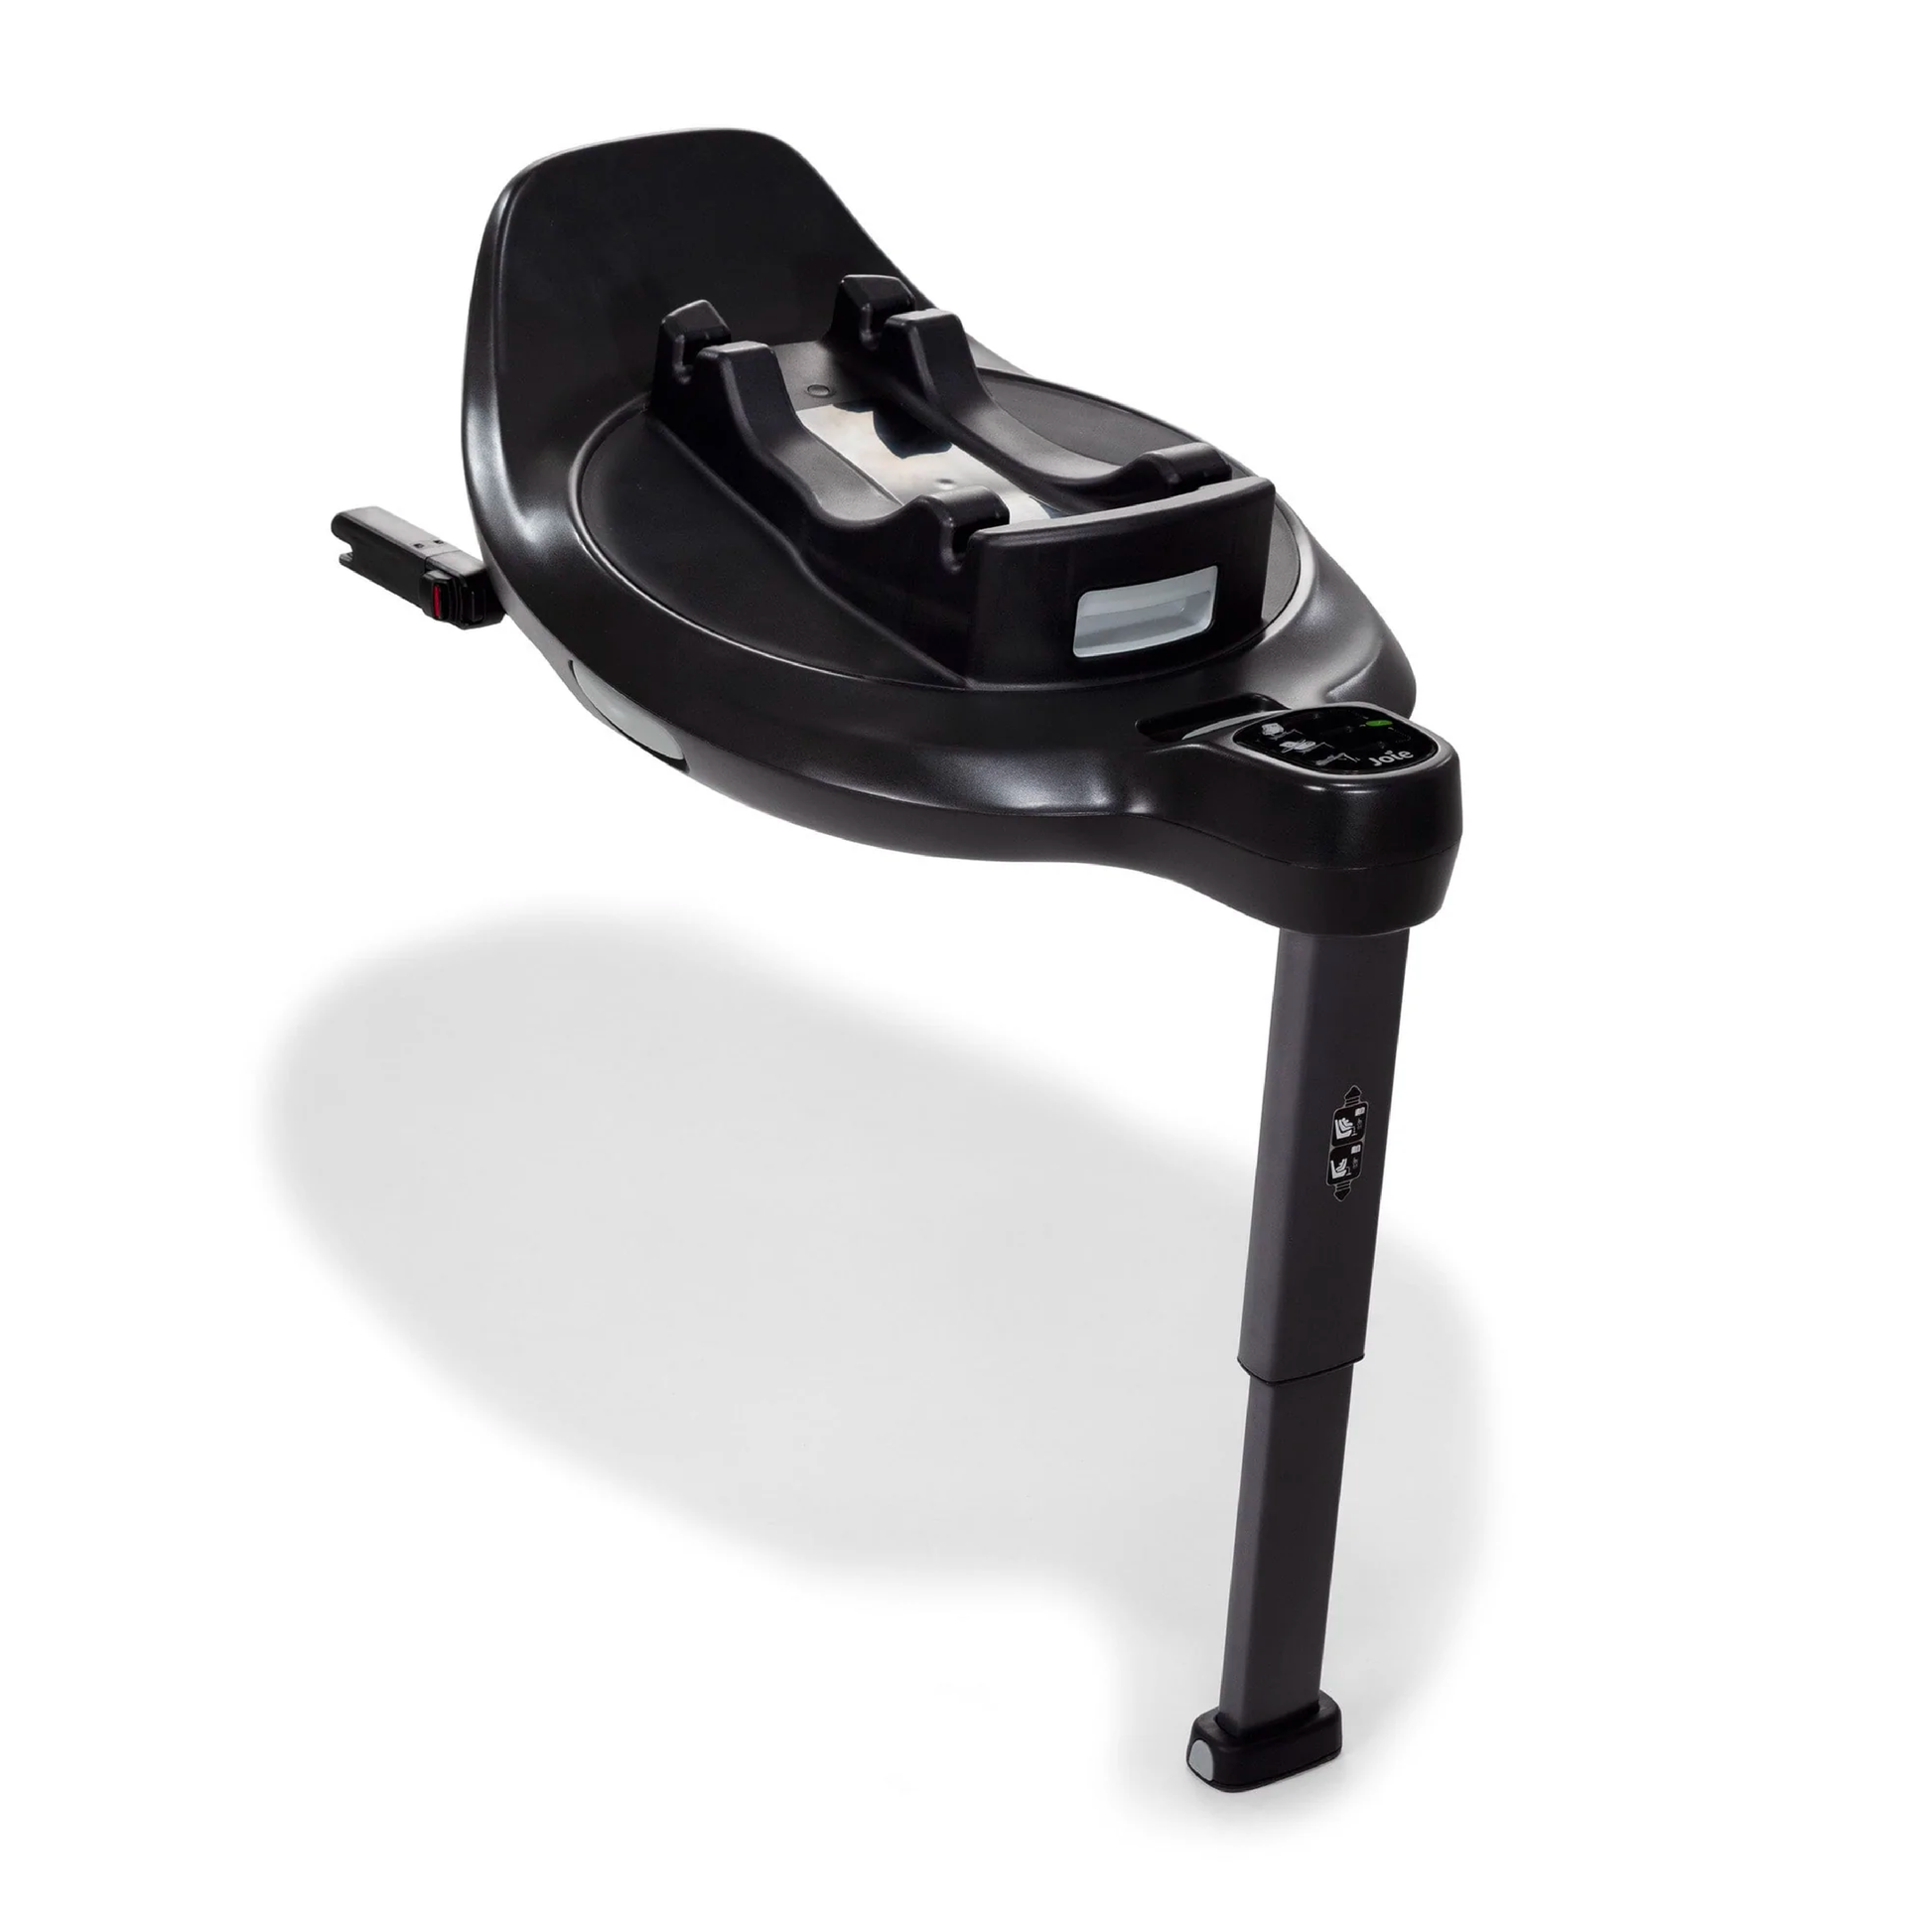 Order the Joie i-Spin 360 Car Seat - BabyDoc Shop Ireland